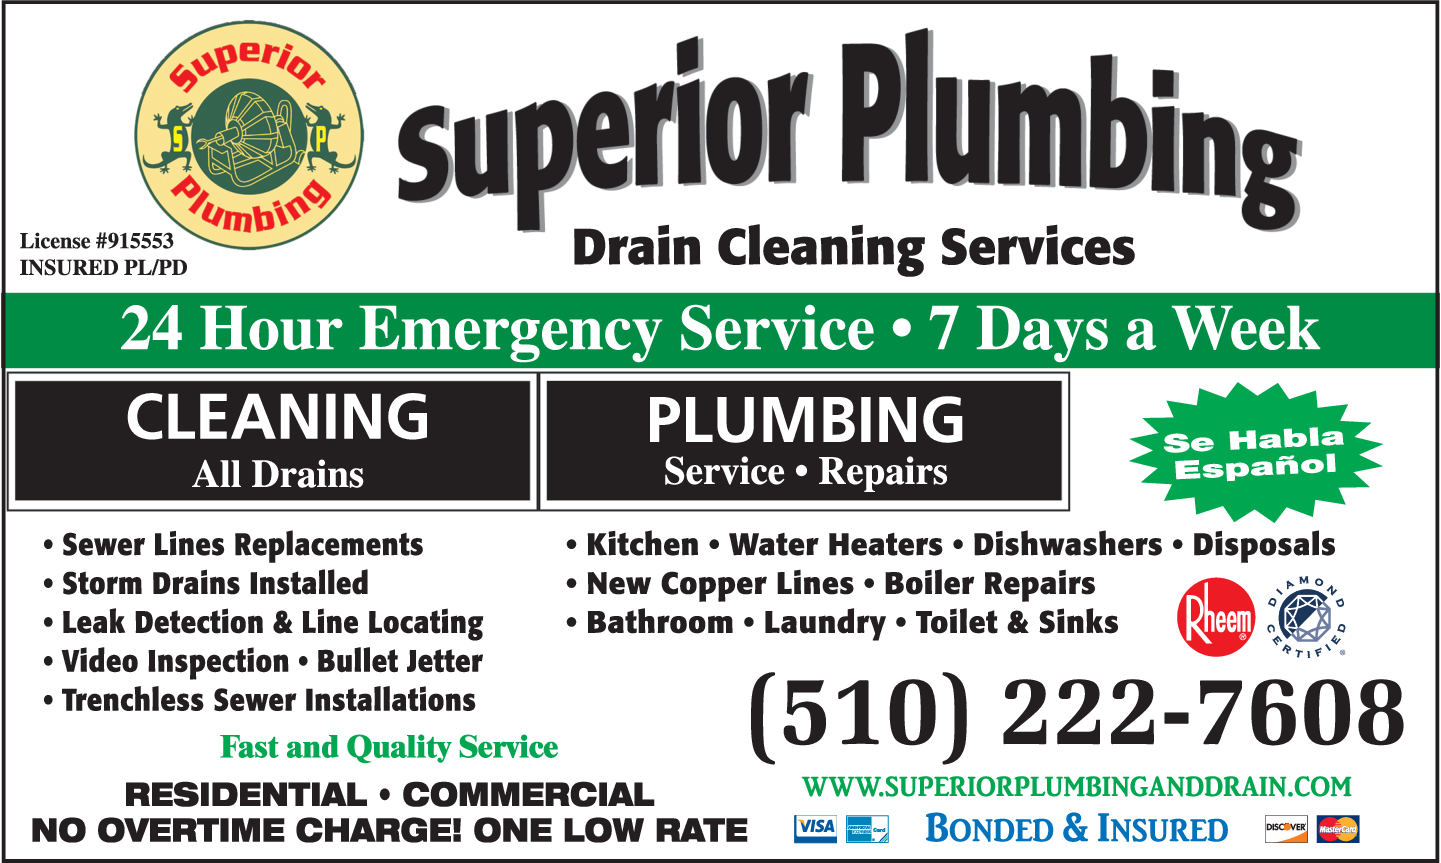 Superior Plumbing & Drain Cleaning Services